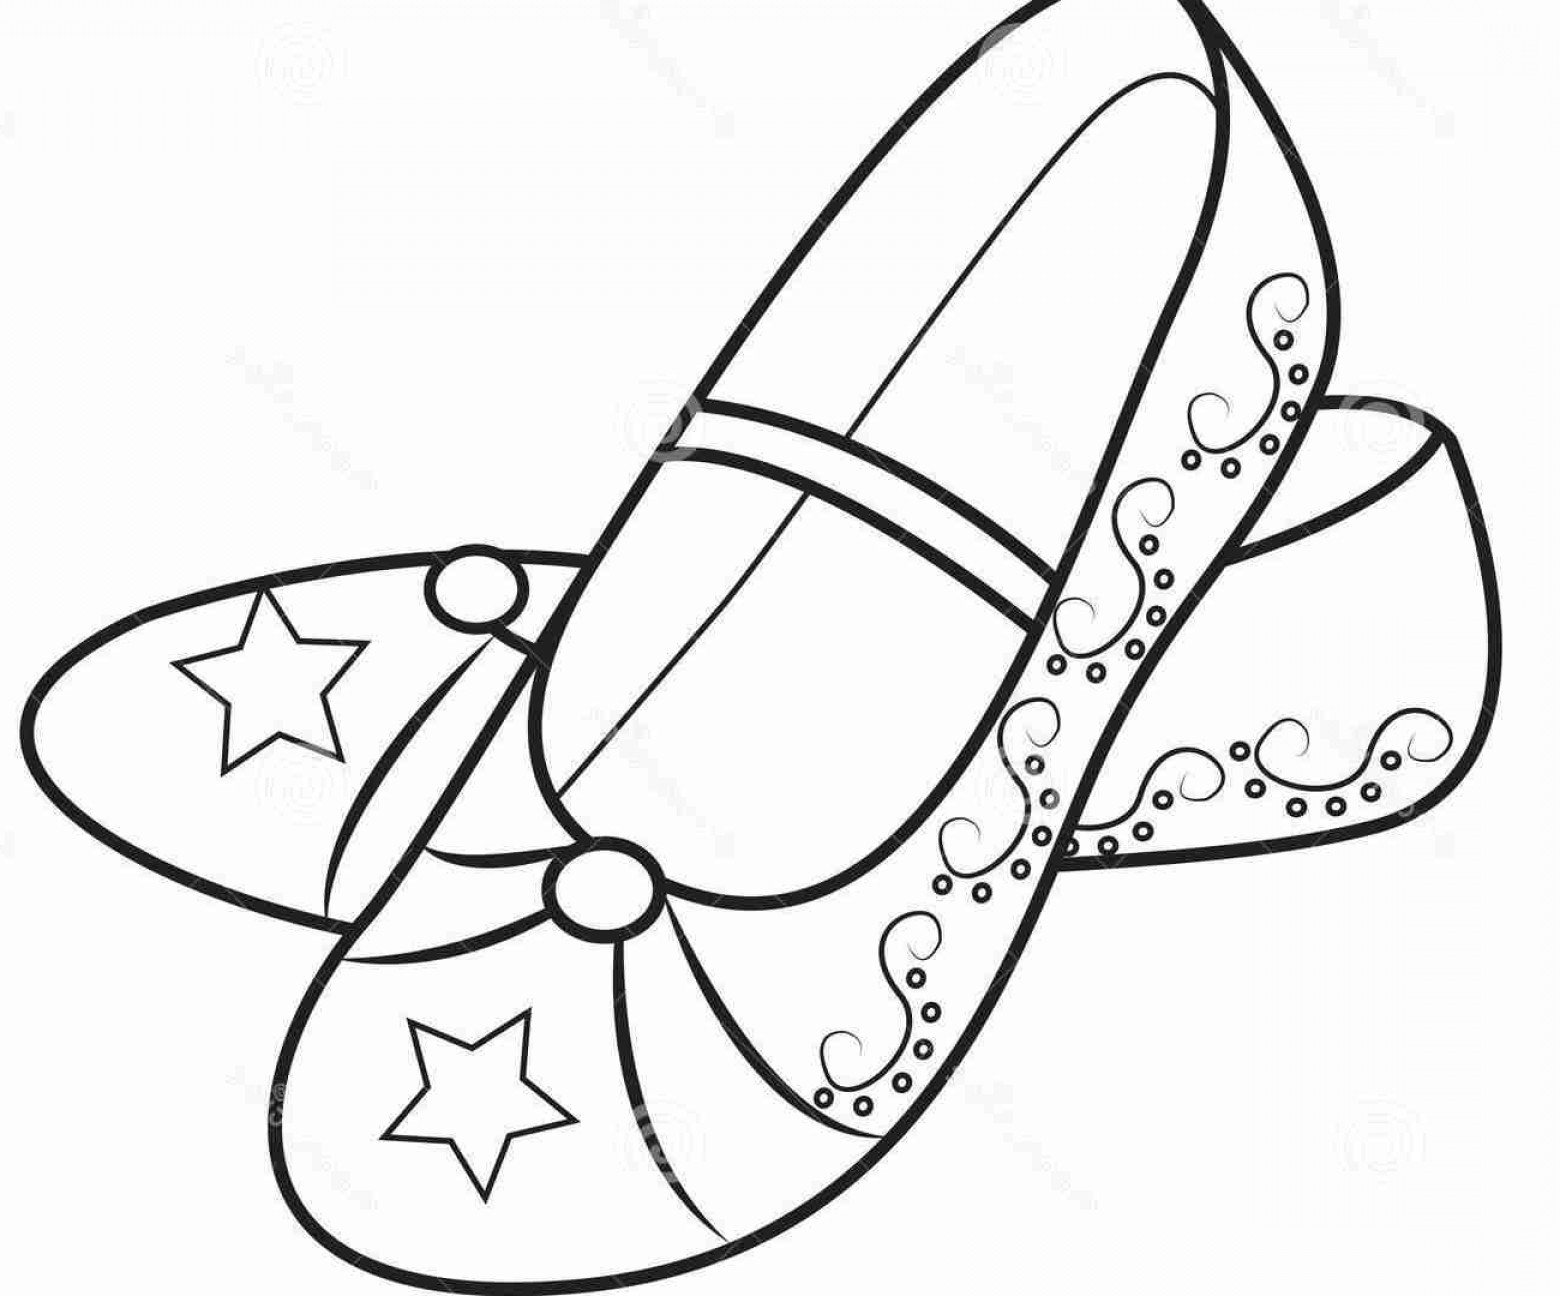 coloring book ~ Jordan Shoes Drawing Free Download On Clipartmag Coloring  Pages Images Of Printable For Kids Nike Awesome Jordan Shoes Coloring Pages  Picture Ideas. Images Of Jordan Shoes Coloring Pages Printable.